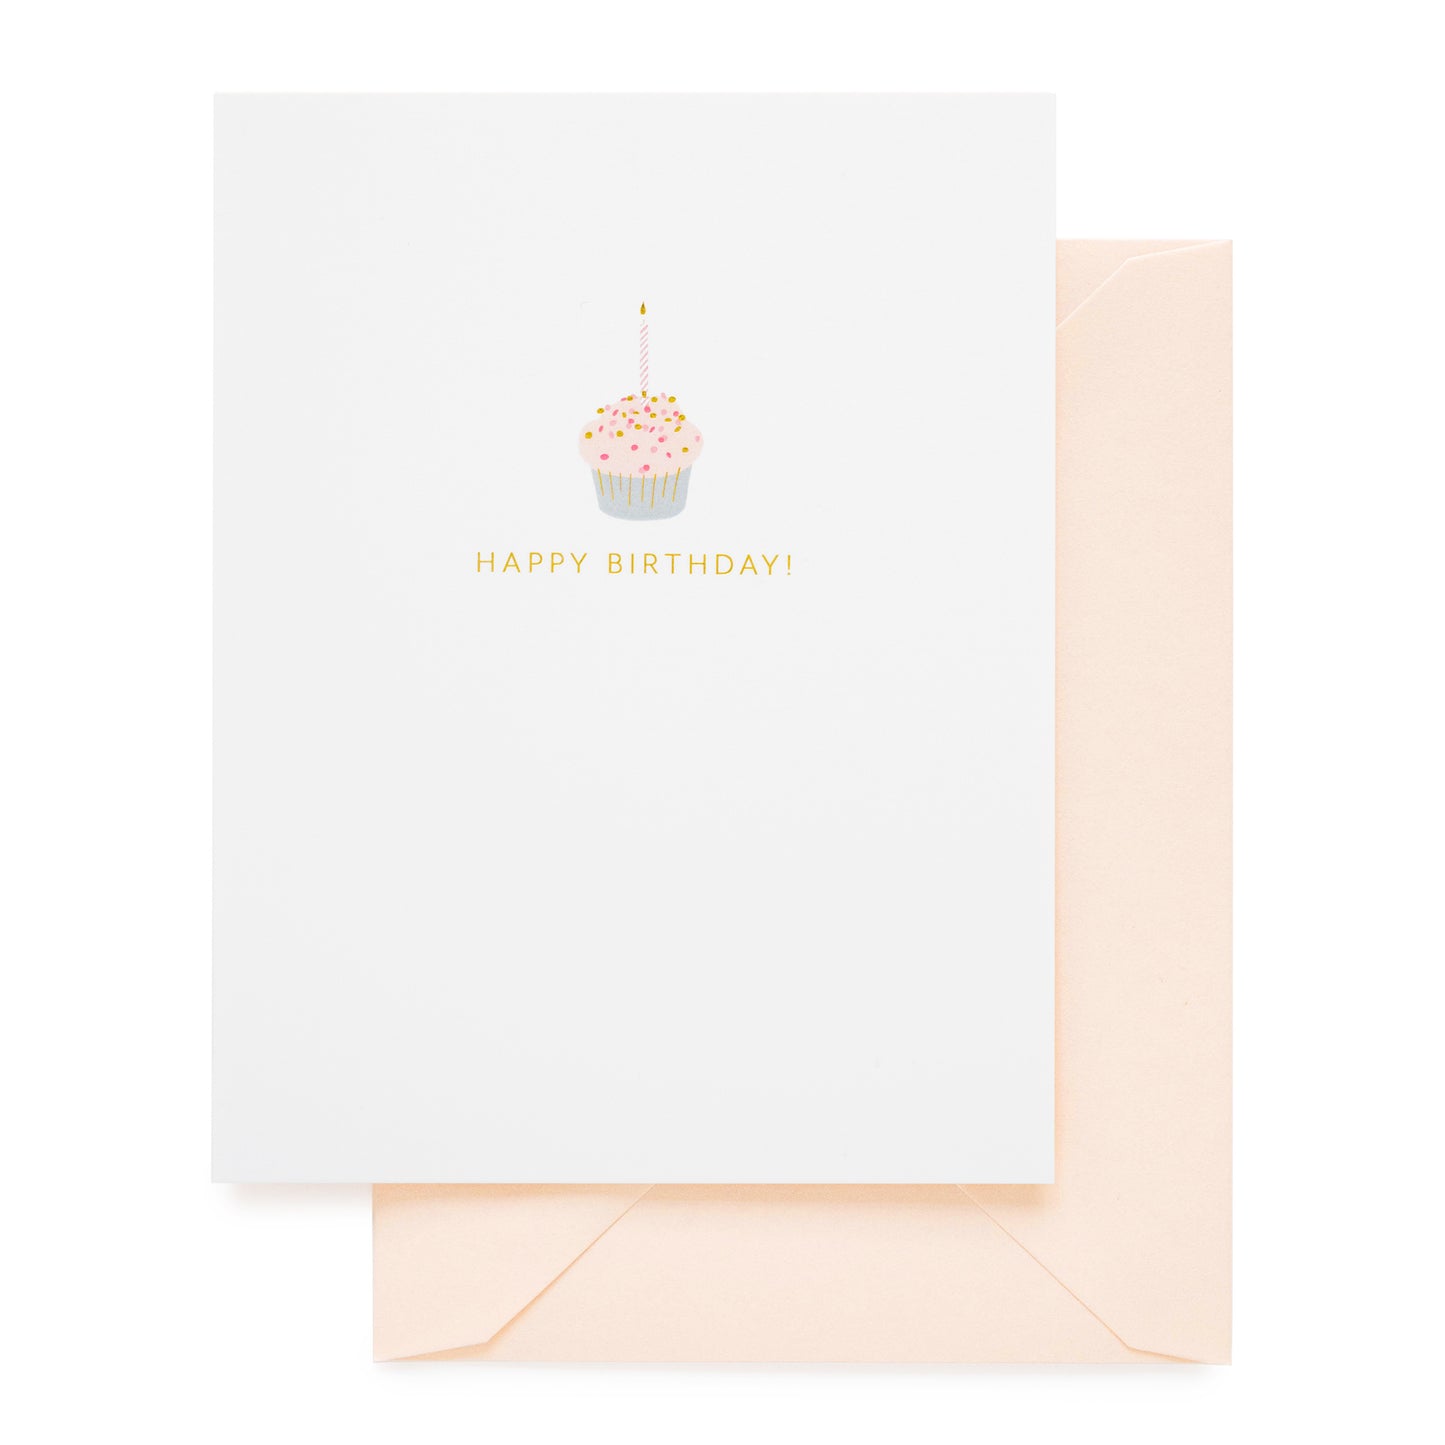 white card with gold foil text and cupcake icon, pale pink envelope